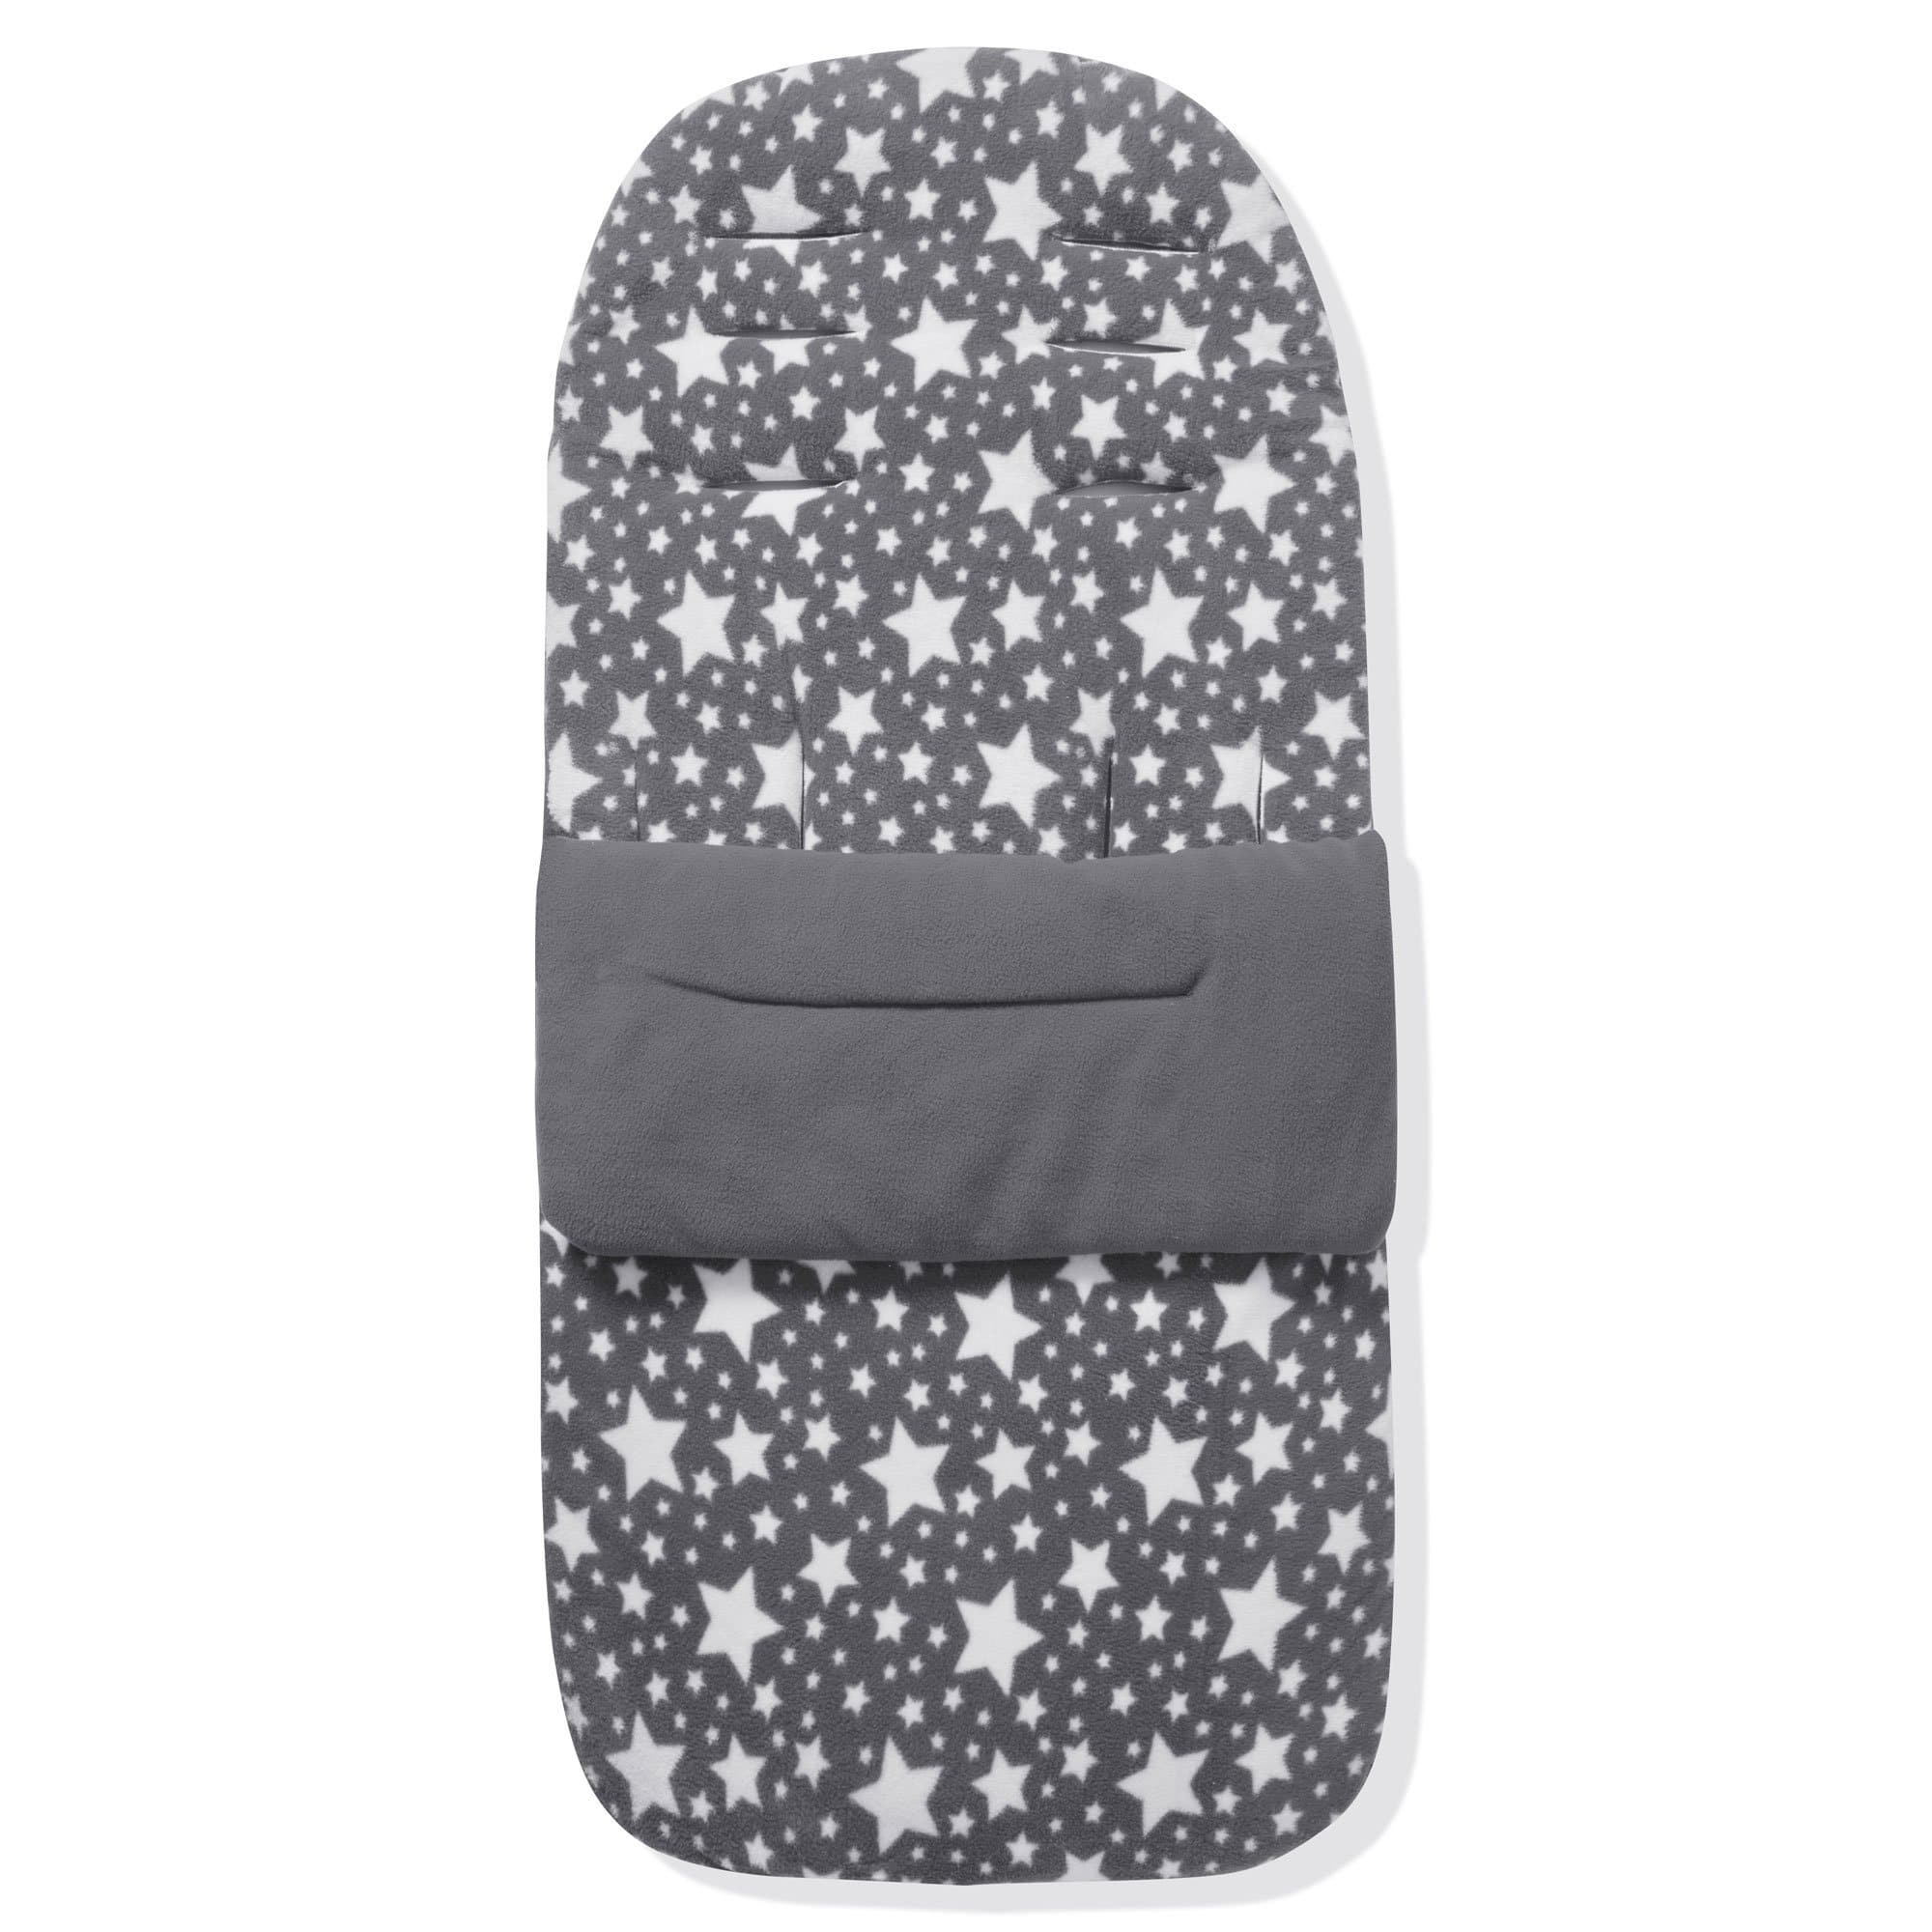 Fleece Footmuff / Cosy Toes Compatible with Bebecar - Grey Star / Fits All Models | For Your Little One